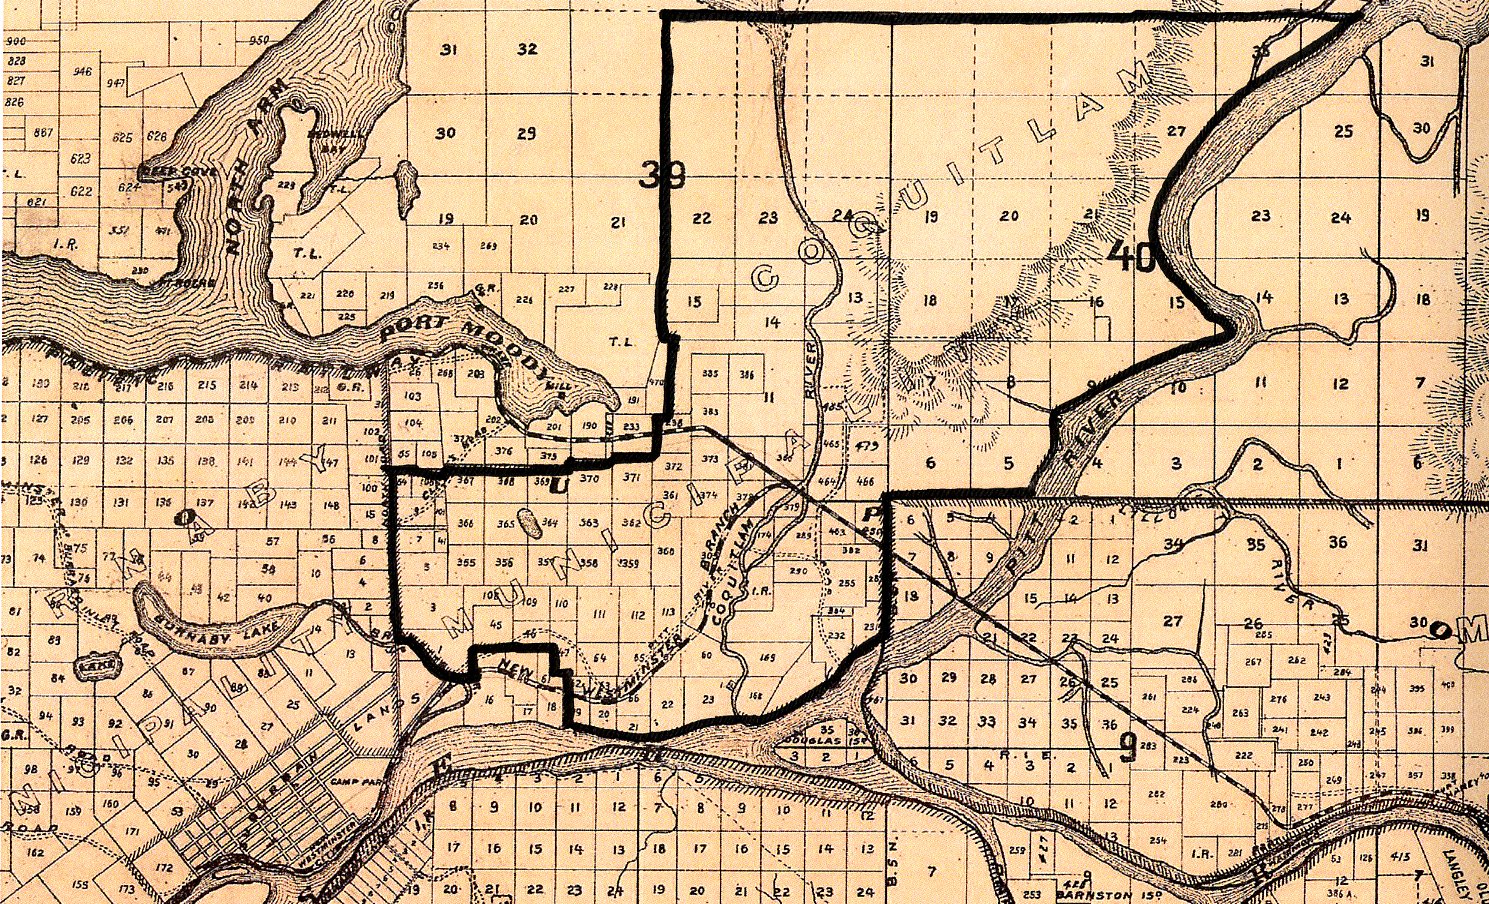 Coquitlam's Original Boundaries Drawn on a Map of New Westminster District from 1892 (JPG) Opens in new window